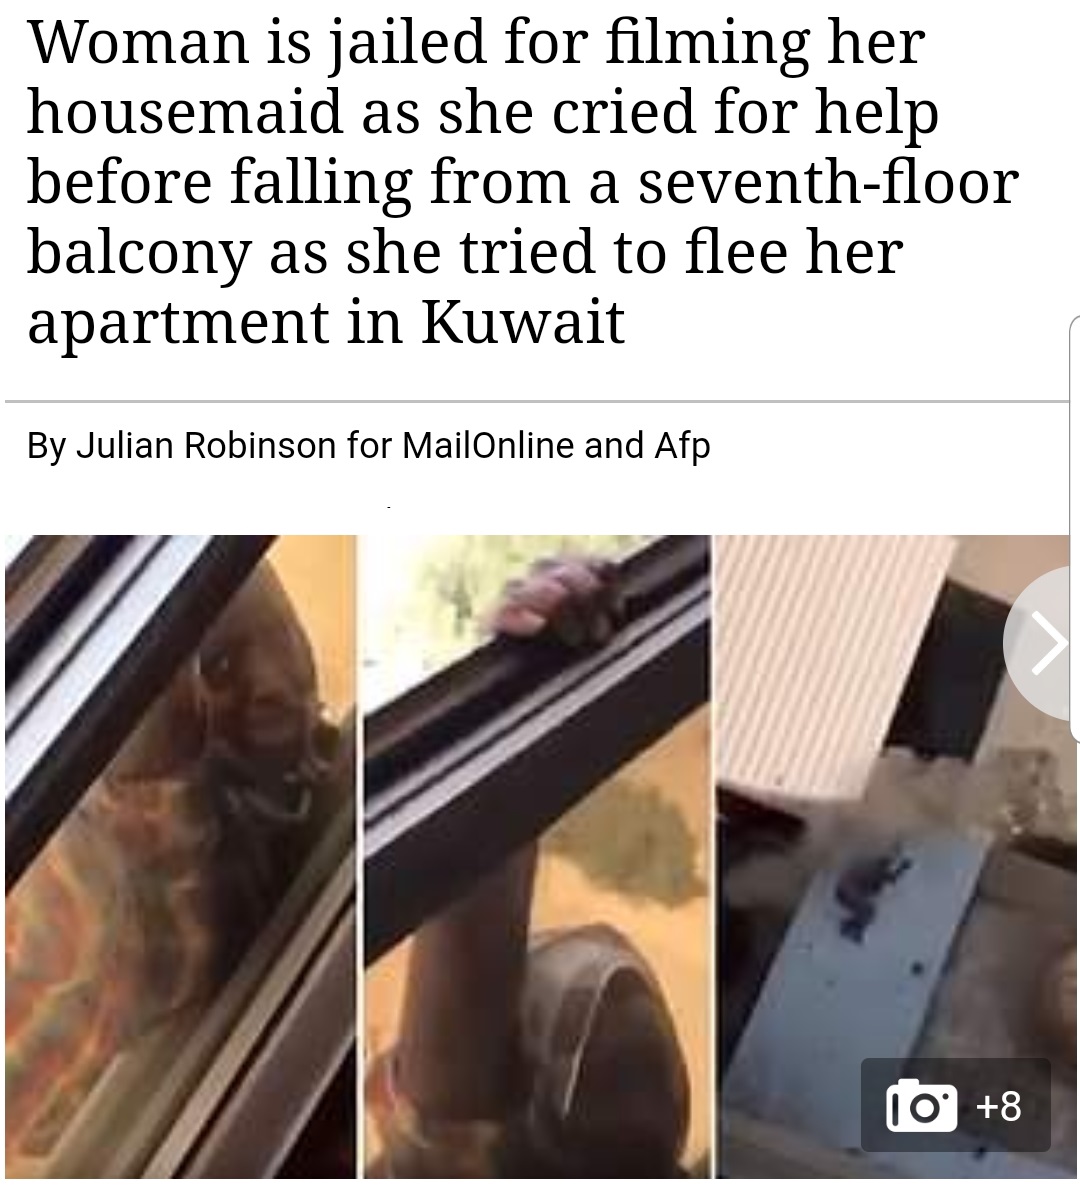 material - Woman is jailed for filming her housemaid as she cried for help before falling from a seventhfloor balcony as she tried to flee her apartment in Kuwait By Julian Robinson for MailOnline and Afp 10 8